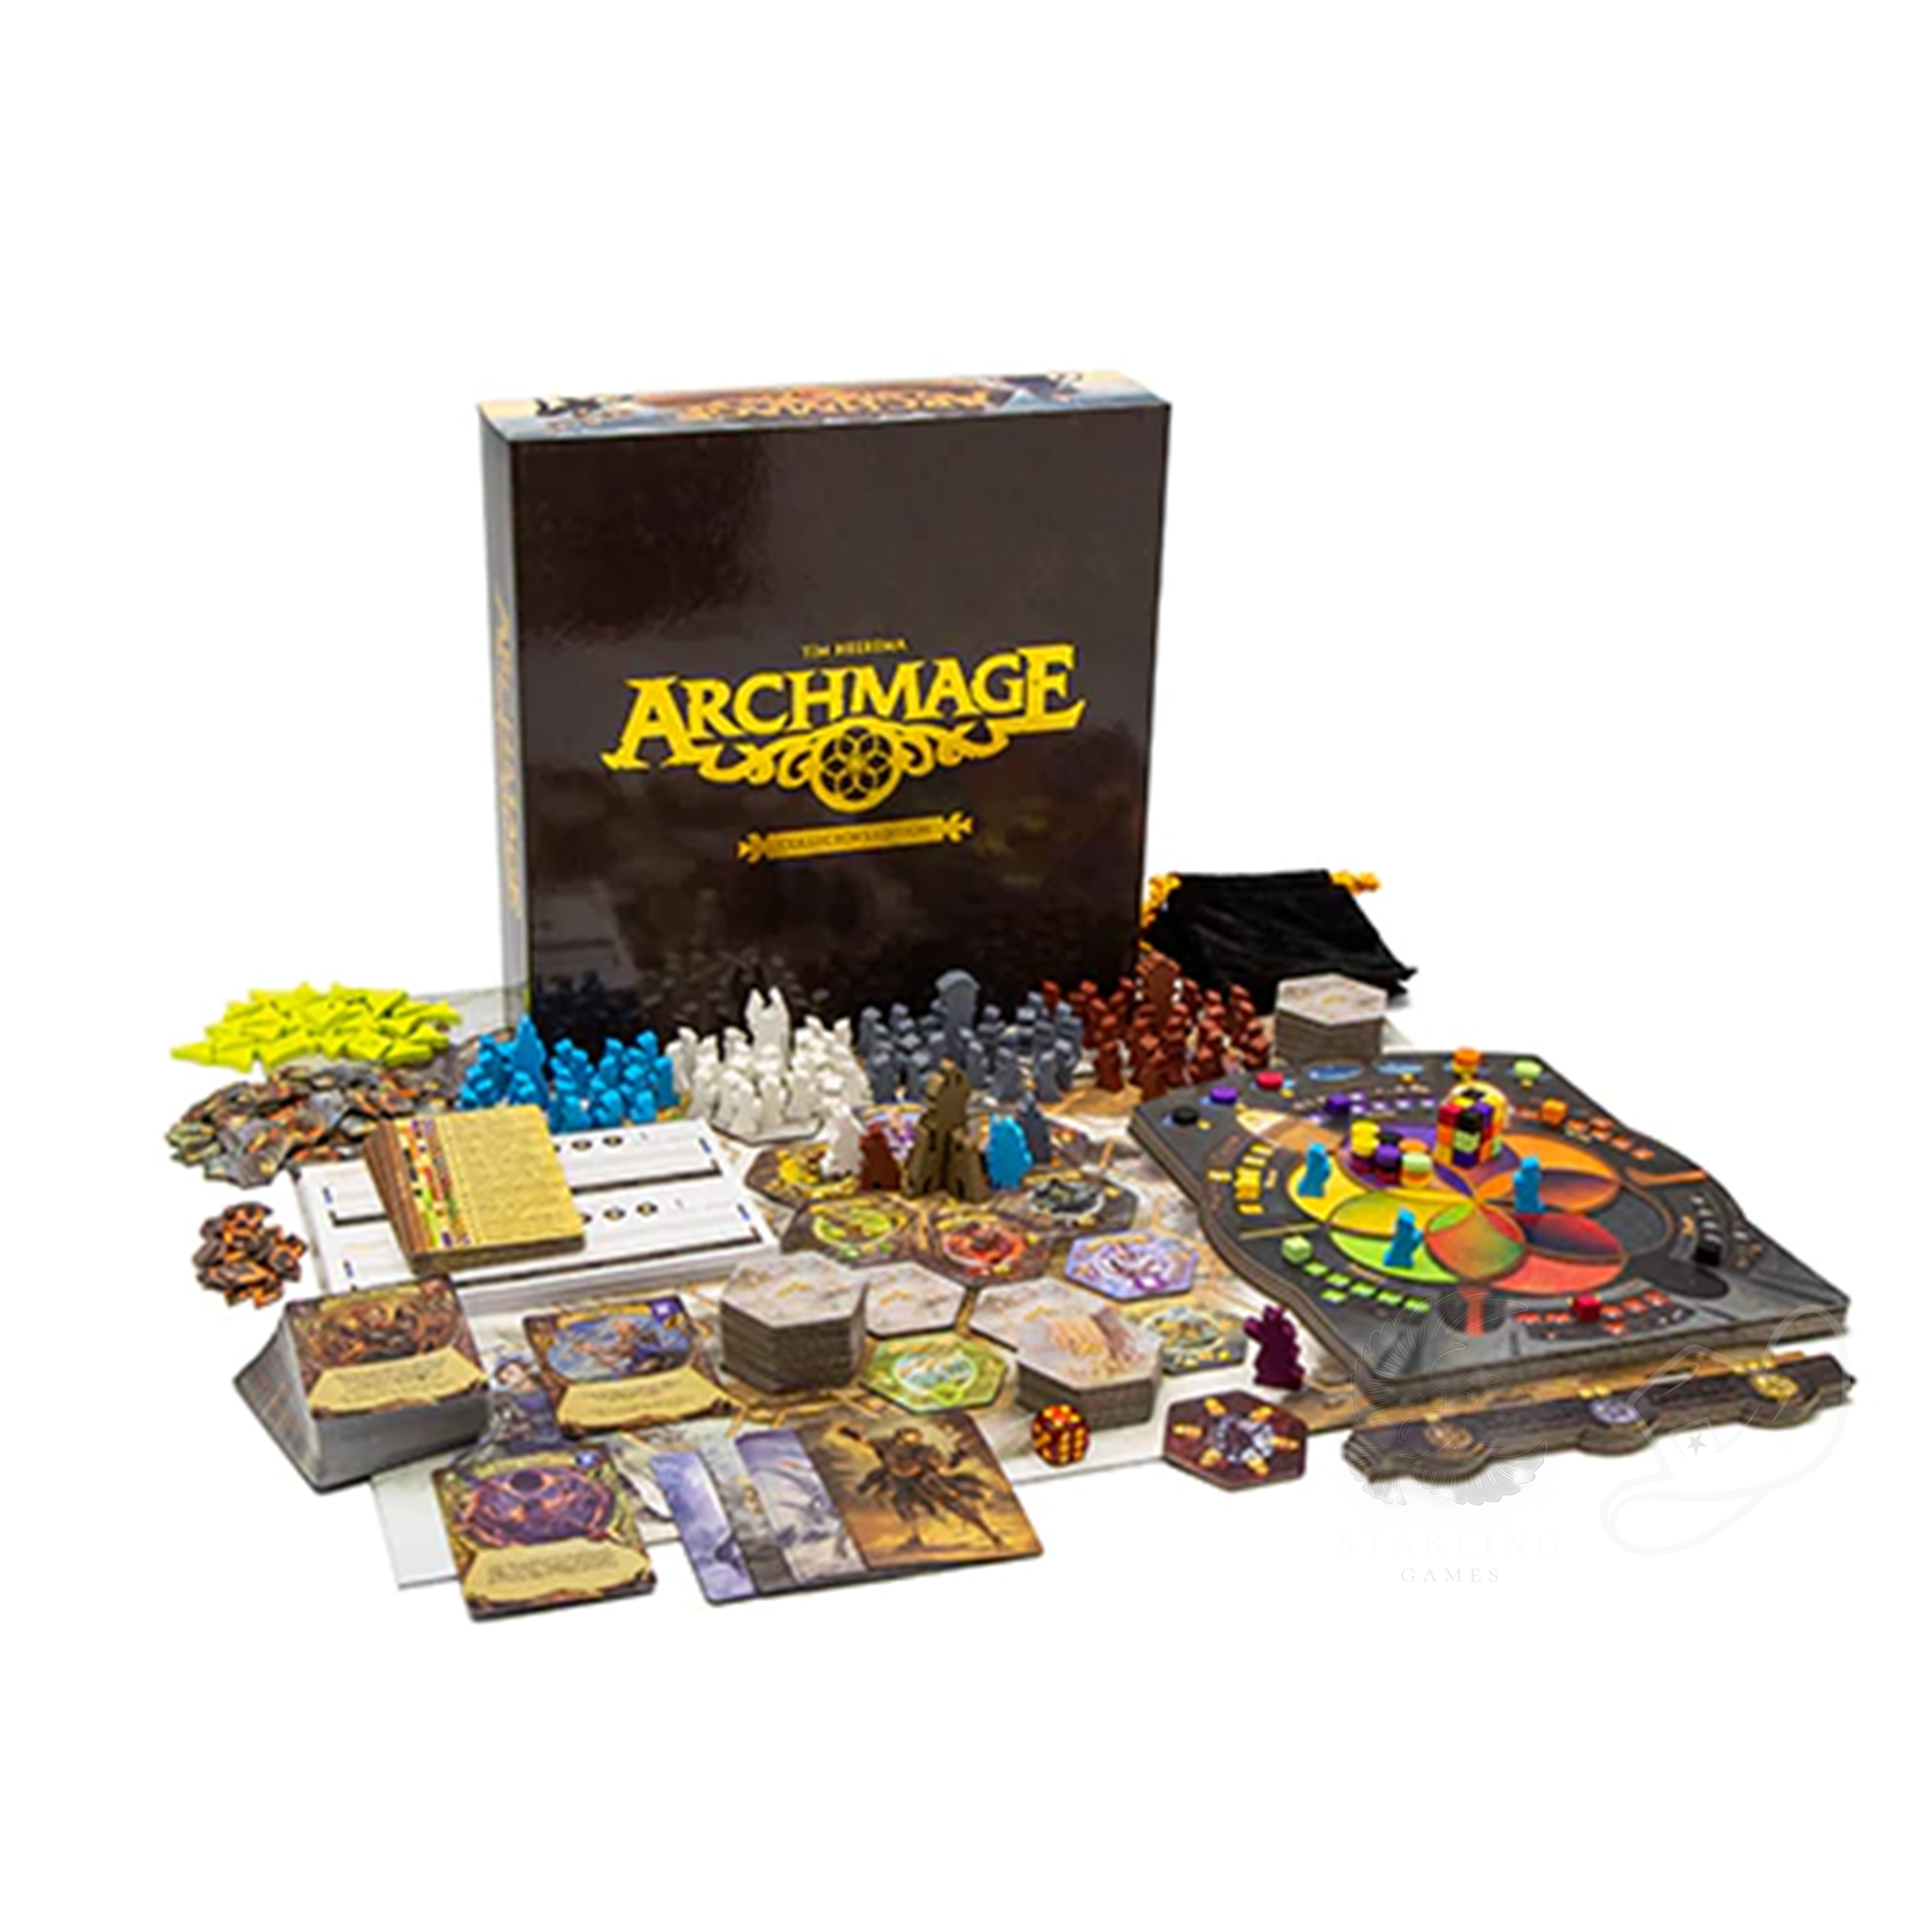 Archmage Collectors Edition core board game pieces minis bord resources and cards